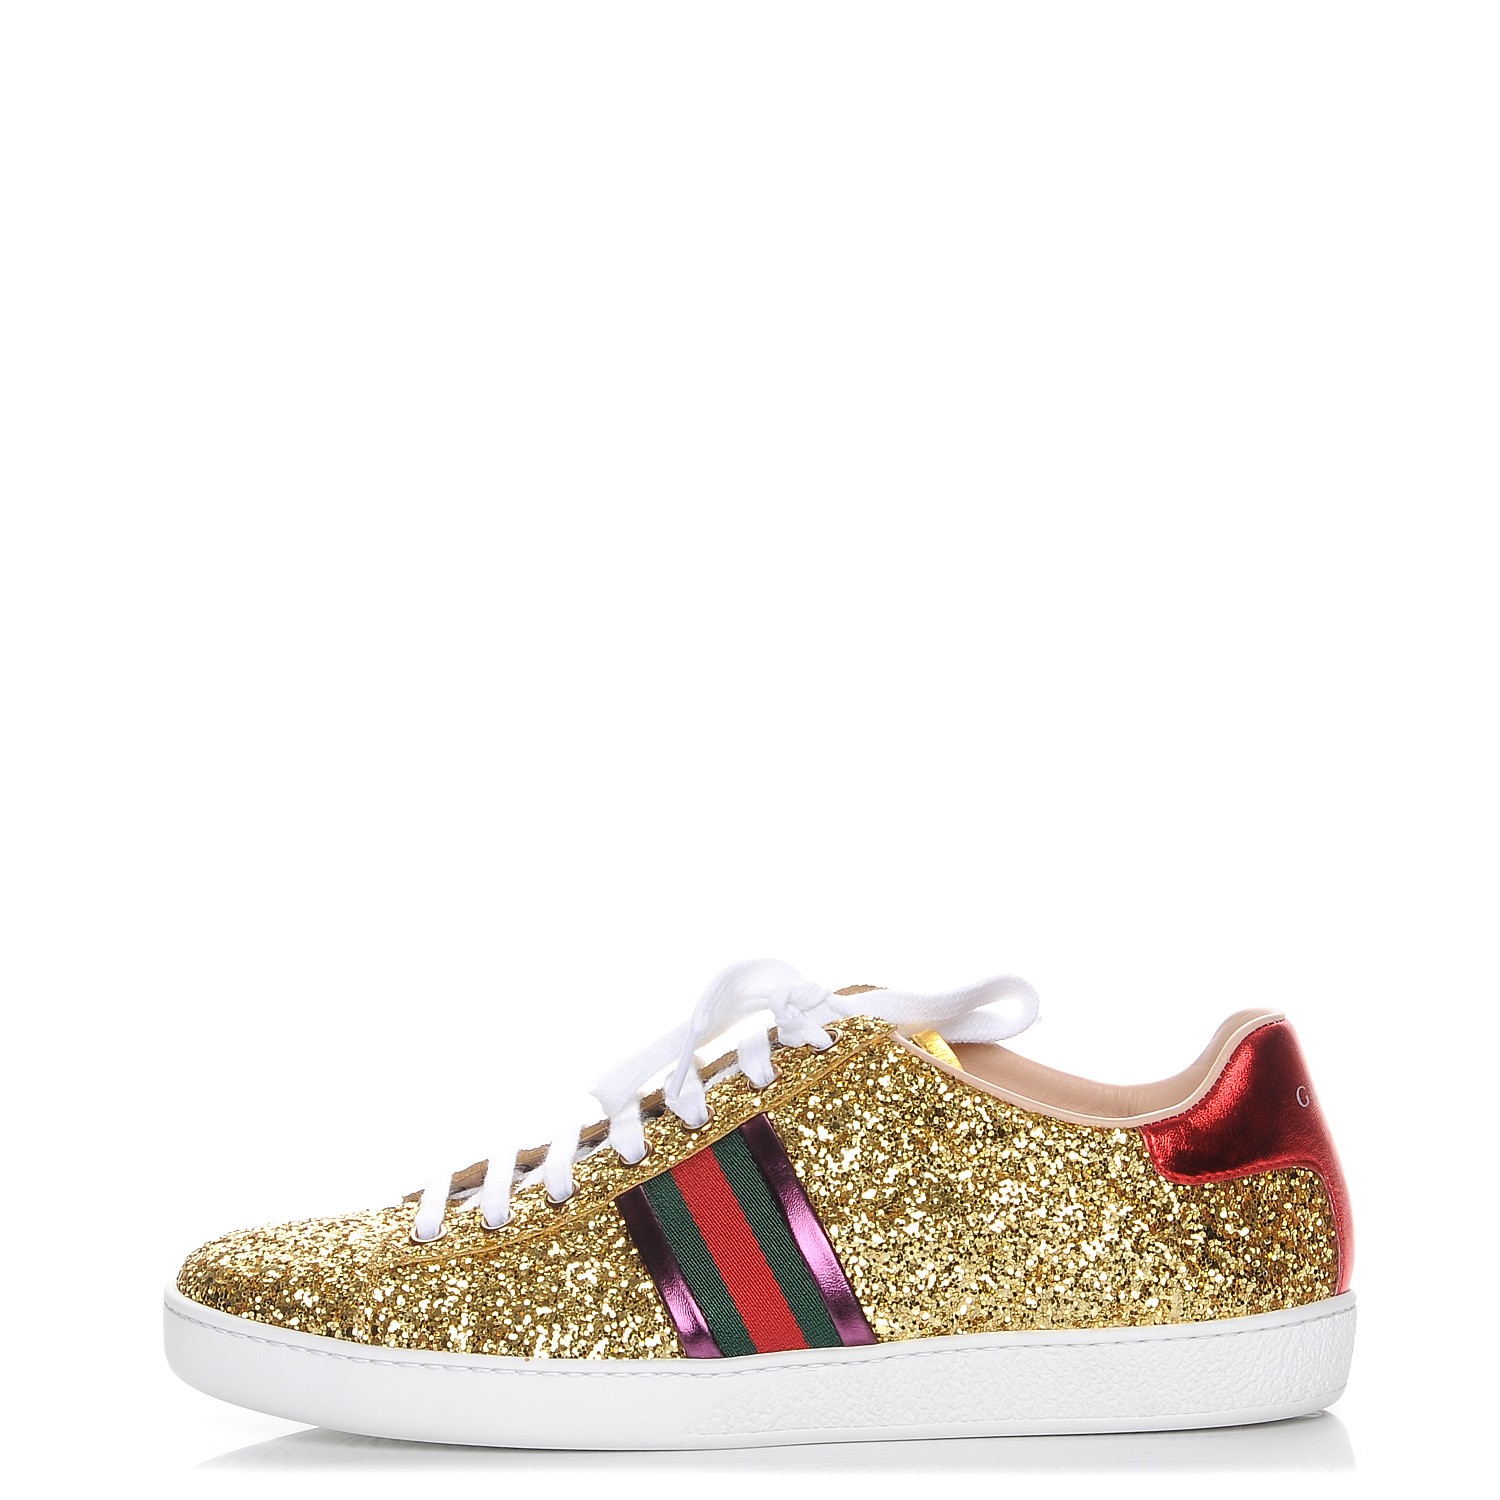 gold gucci tennis shoes